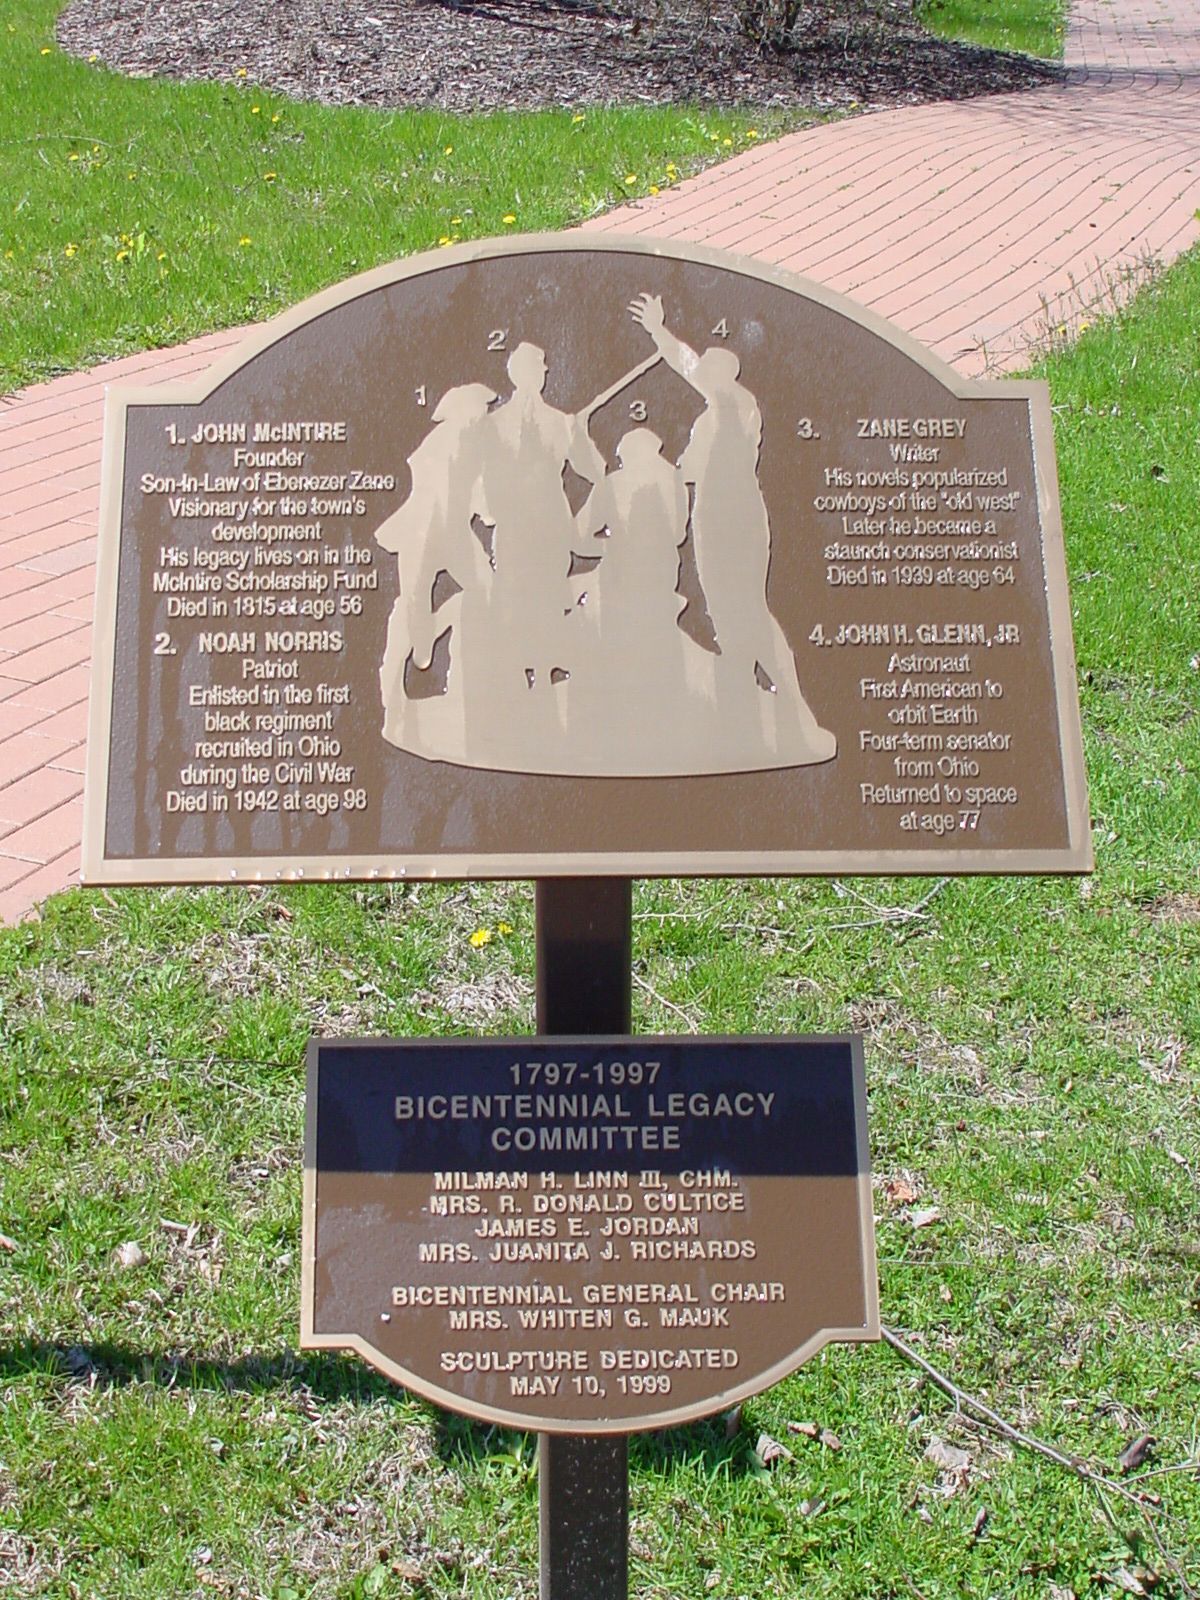 The Bicentennial Legacy Monument Marker